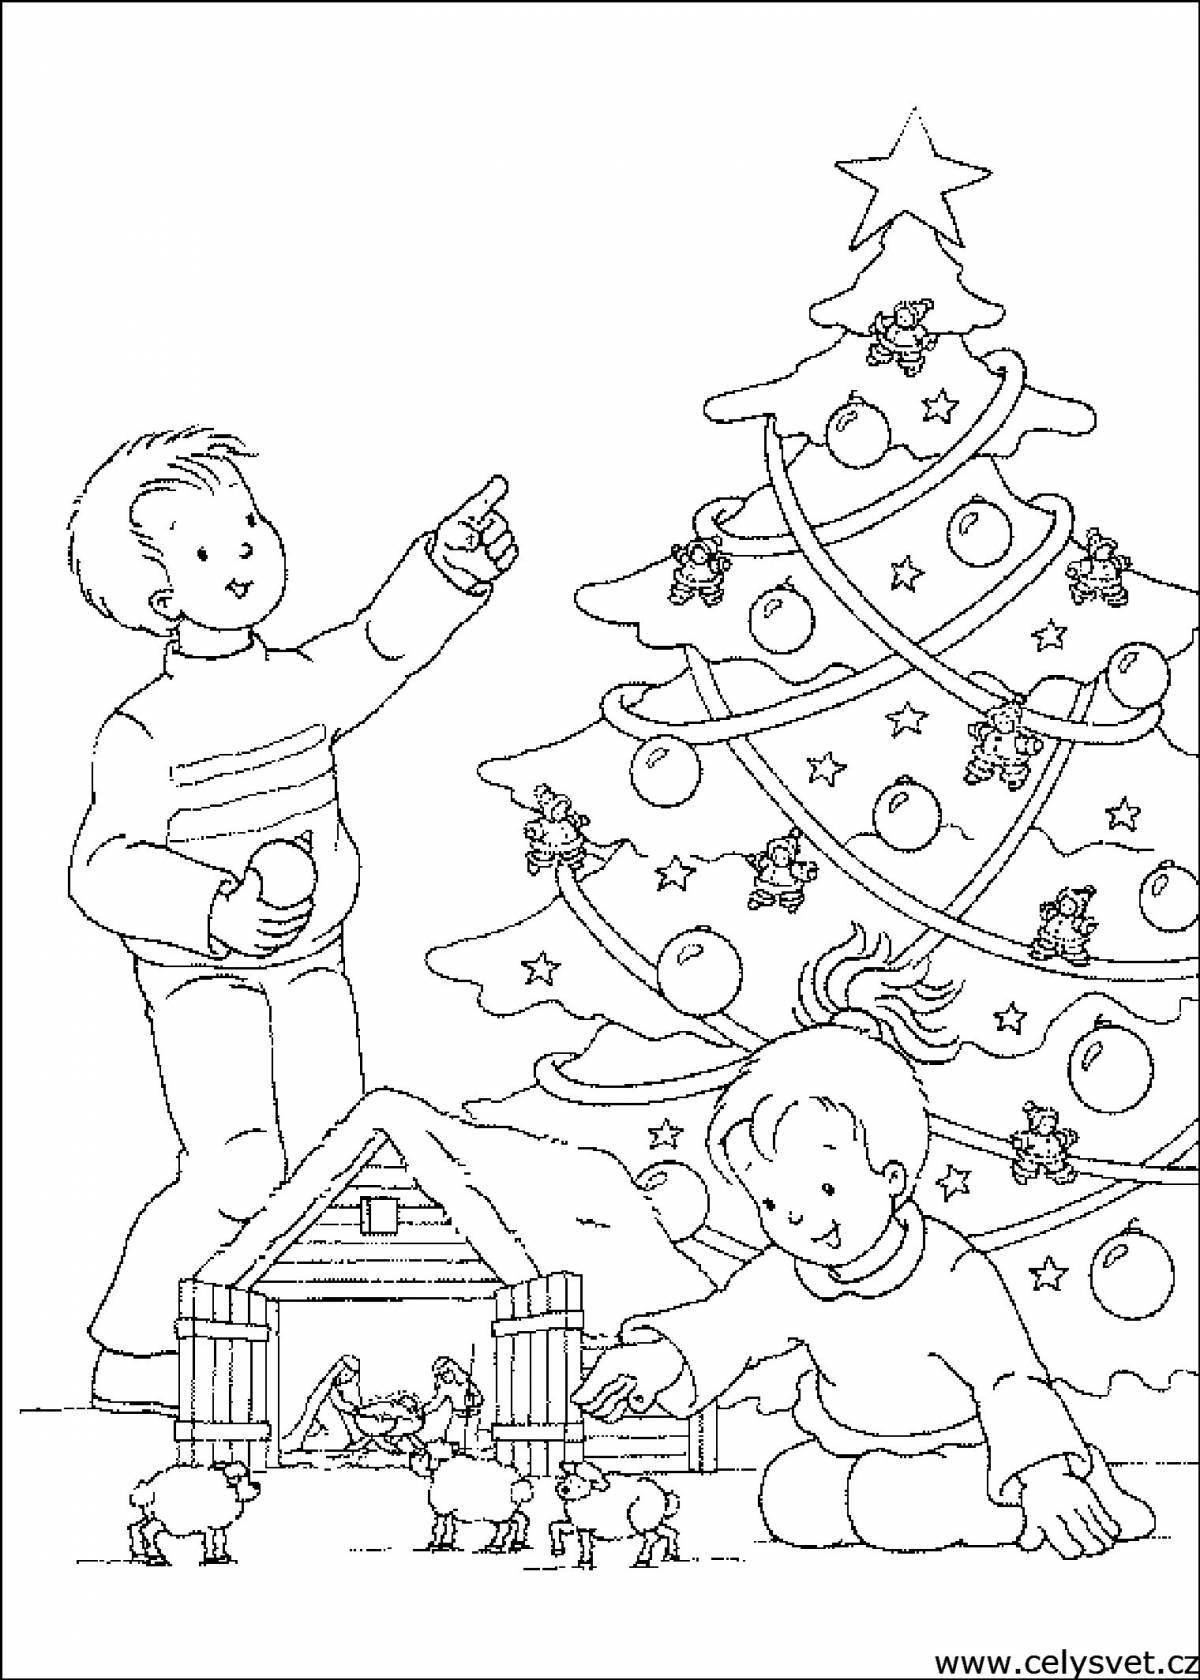 Bright Christmas coloring pages